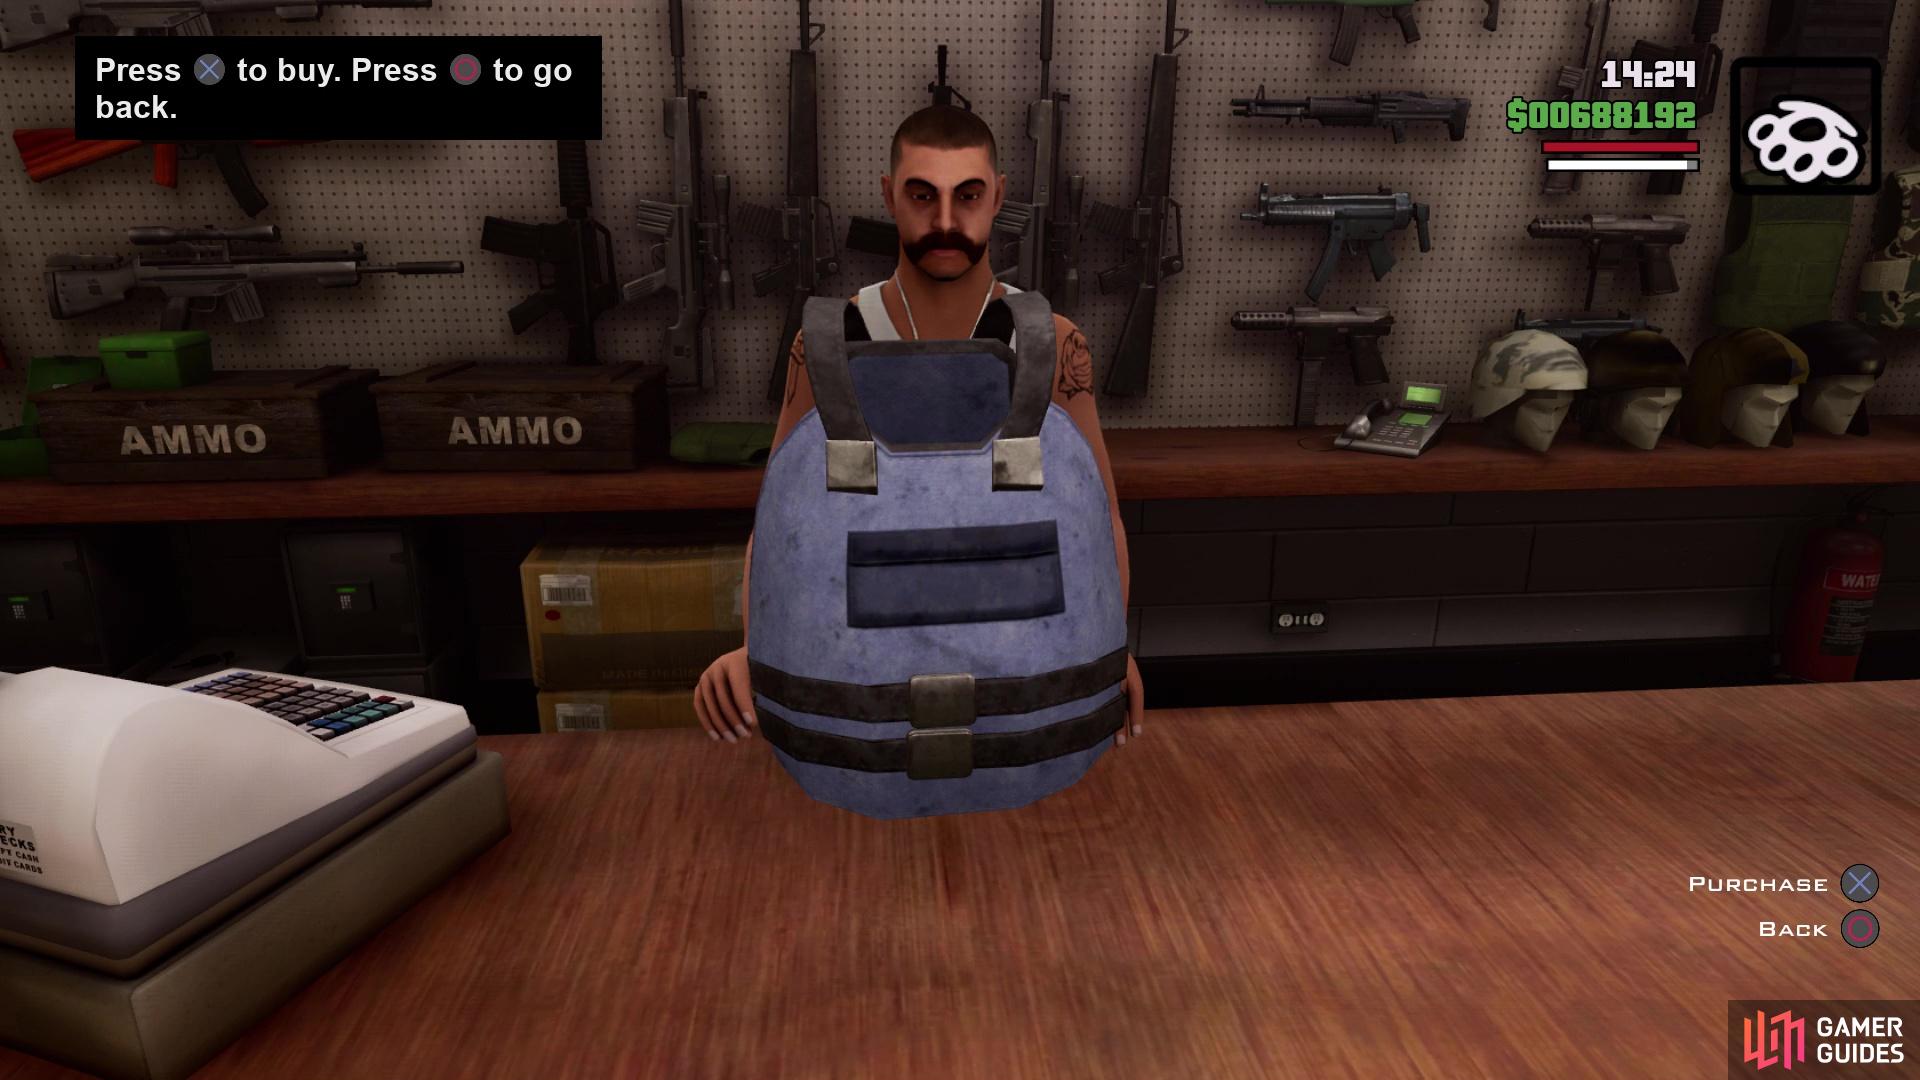 Ammu-Nation will finally unlock, allowing you to purchase guns and armor